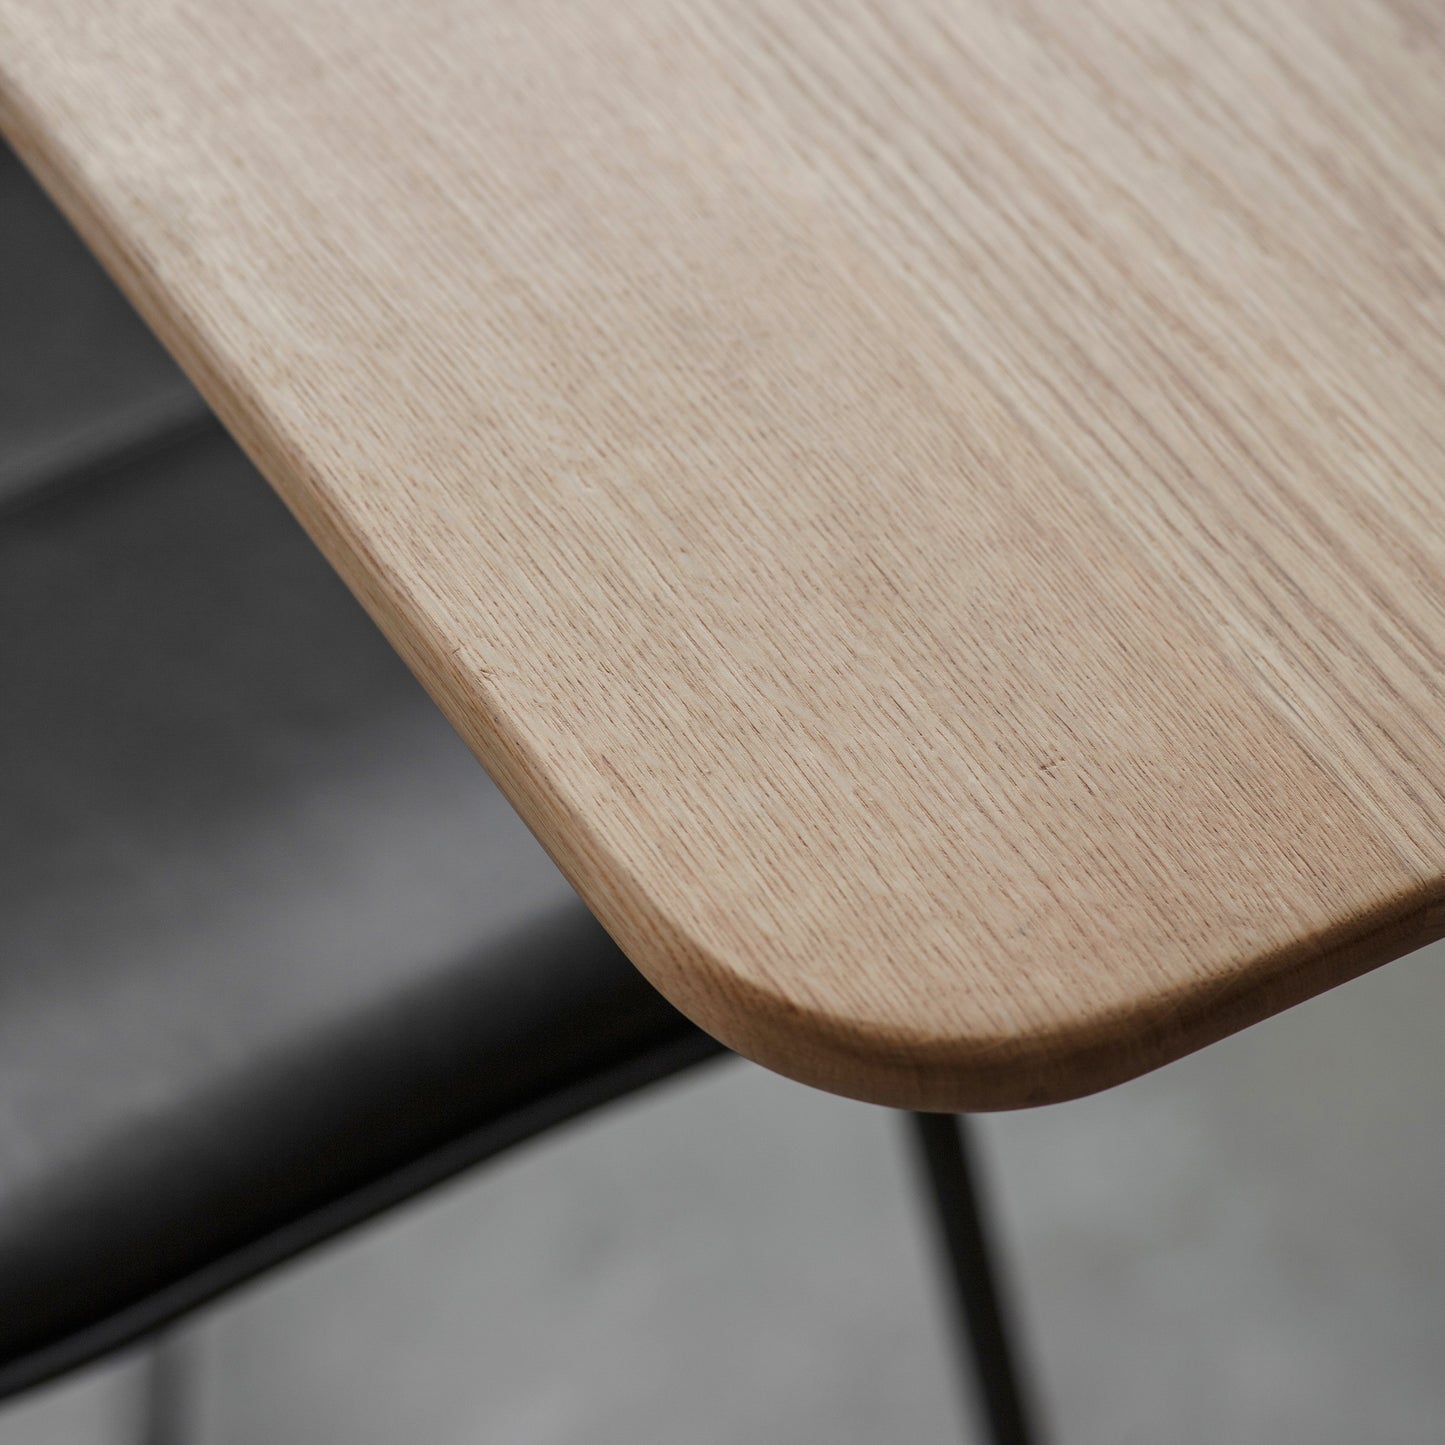 A close up of the Wembury Extendable Dining Table by Kikiathome.co.uk in interior decor setting with black chairs.